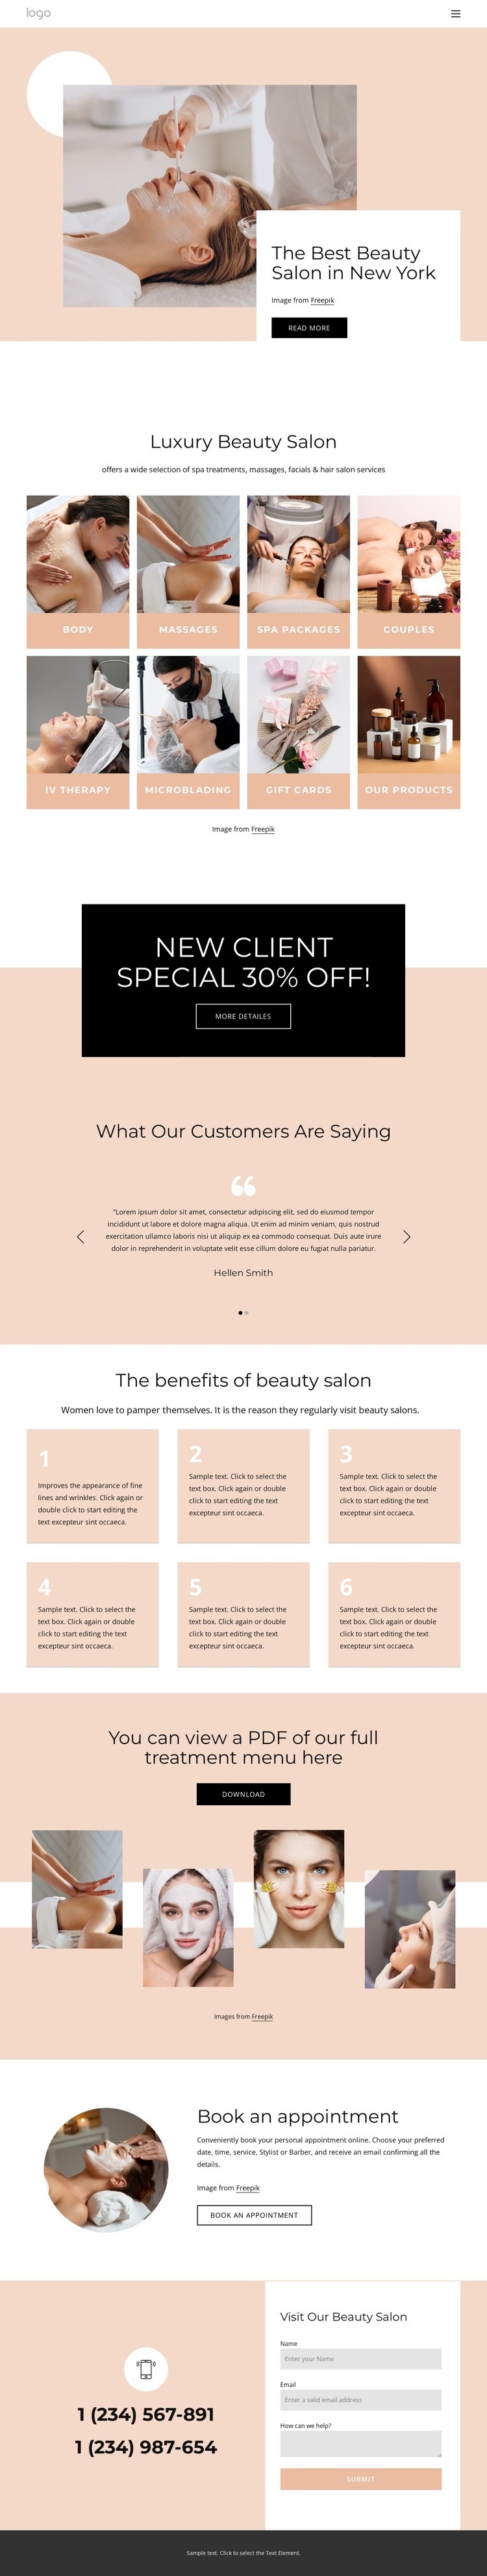 The best beauty salon in NYC Html Code Example